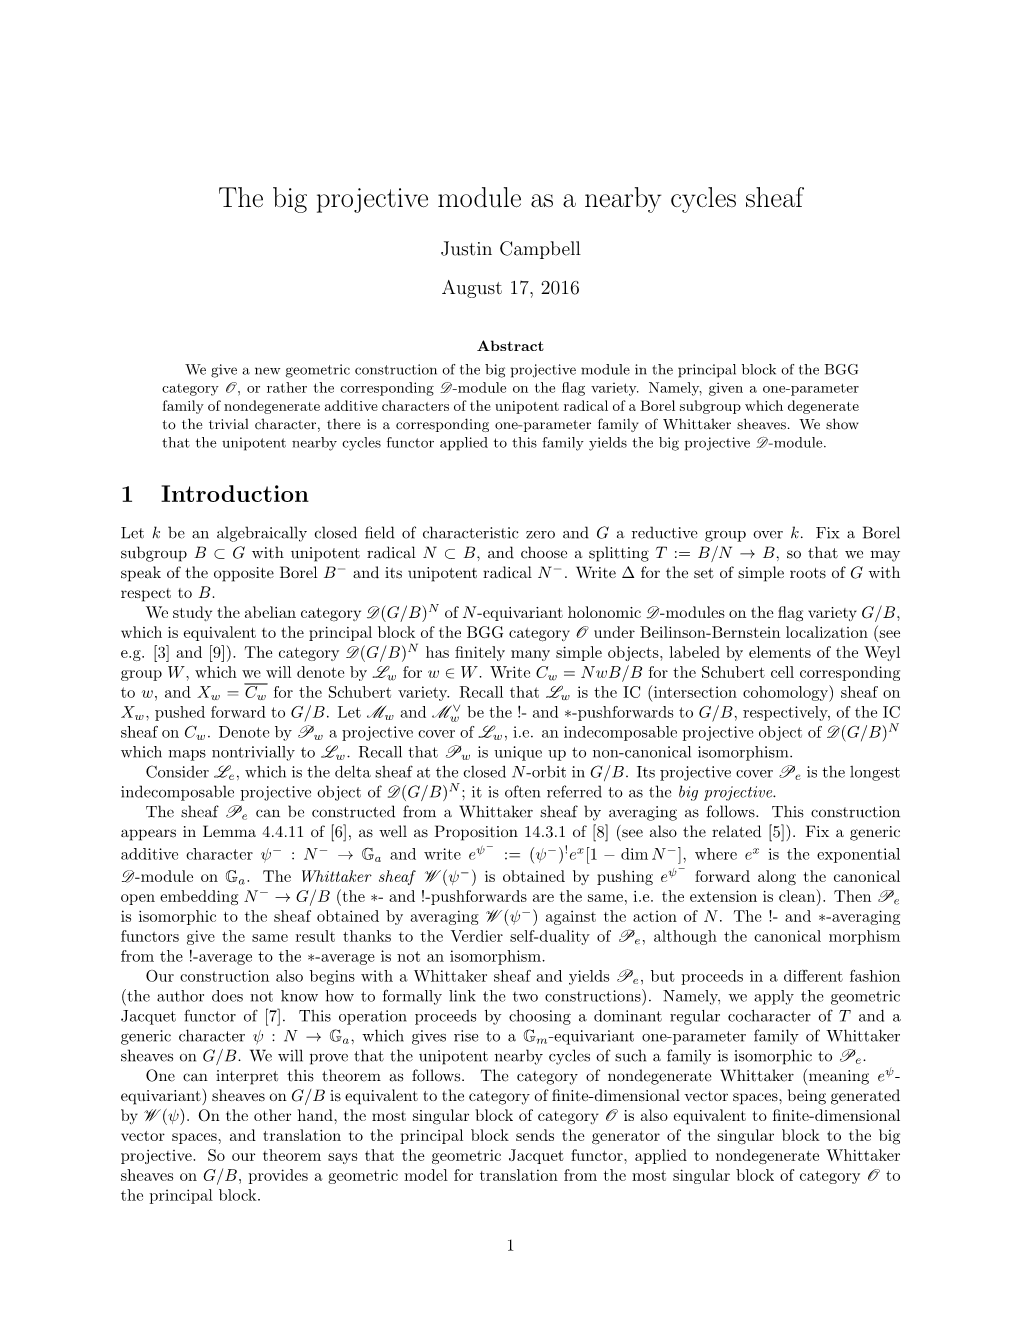 The Big Projective Module As a Nearby Cycles Sheaf